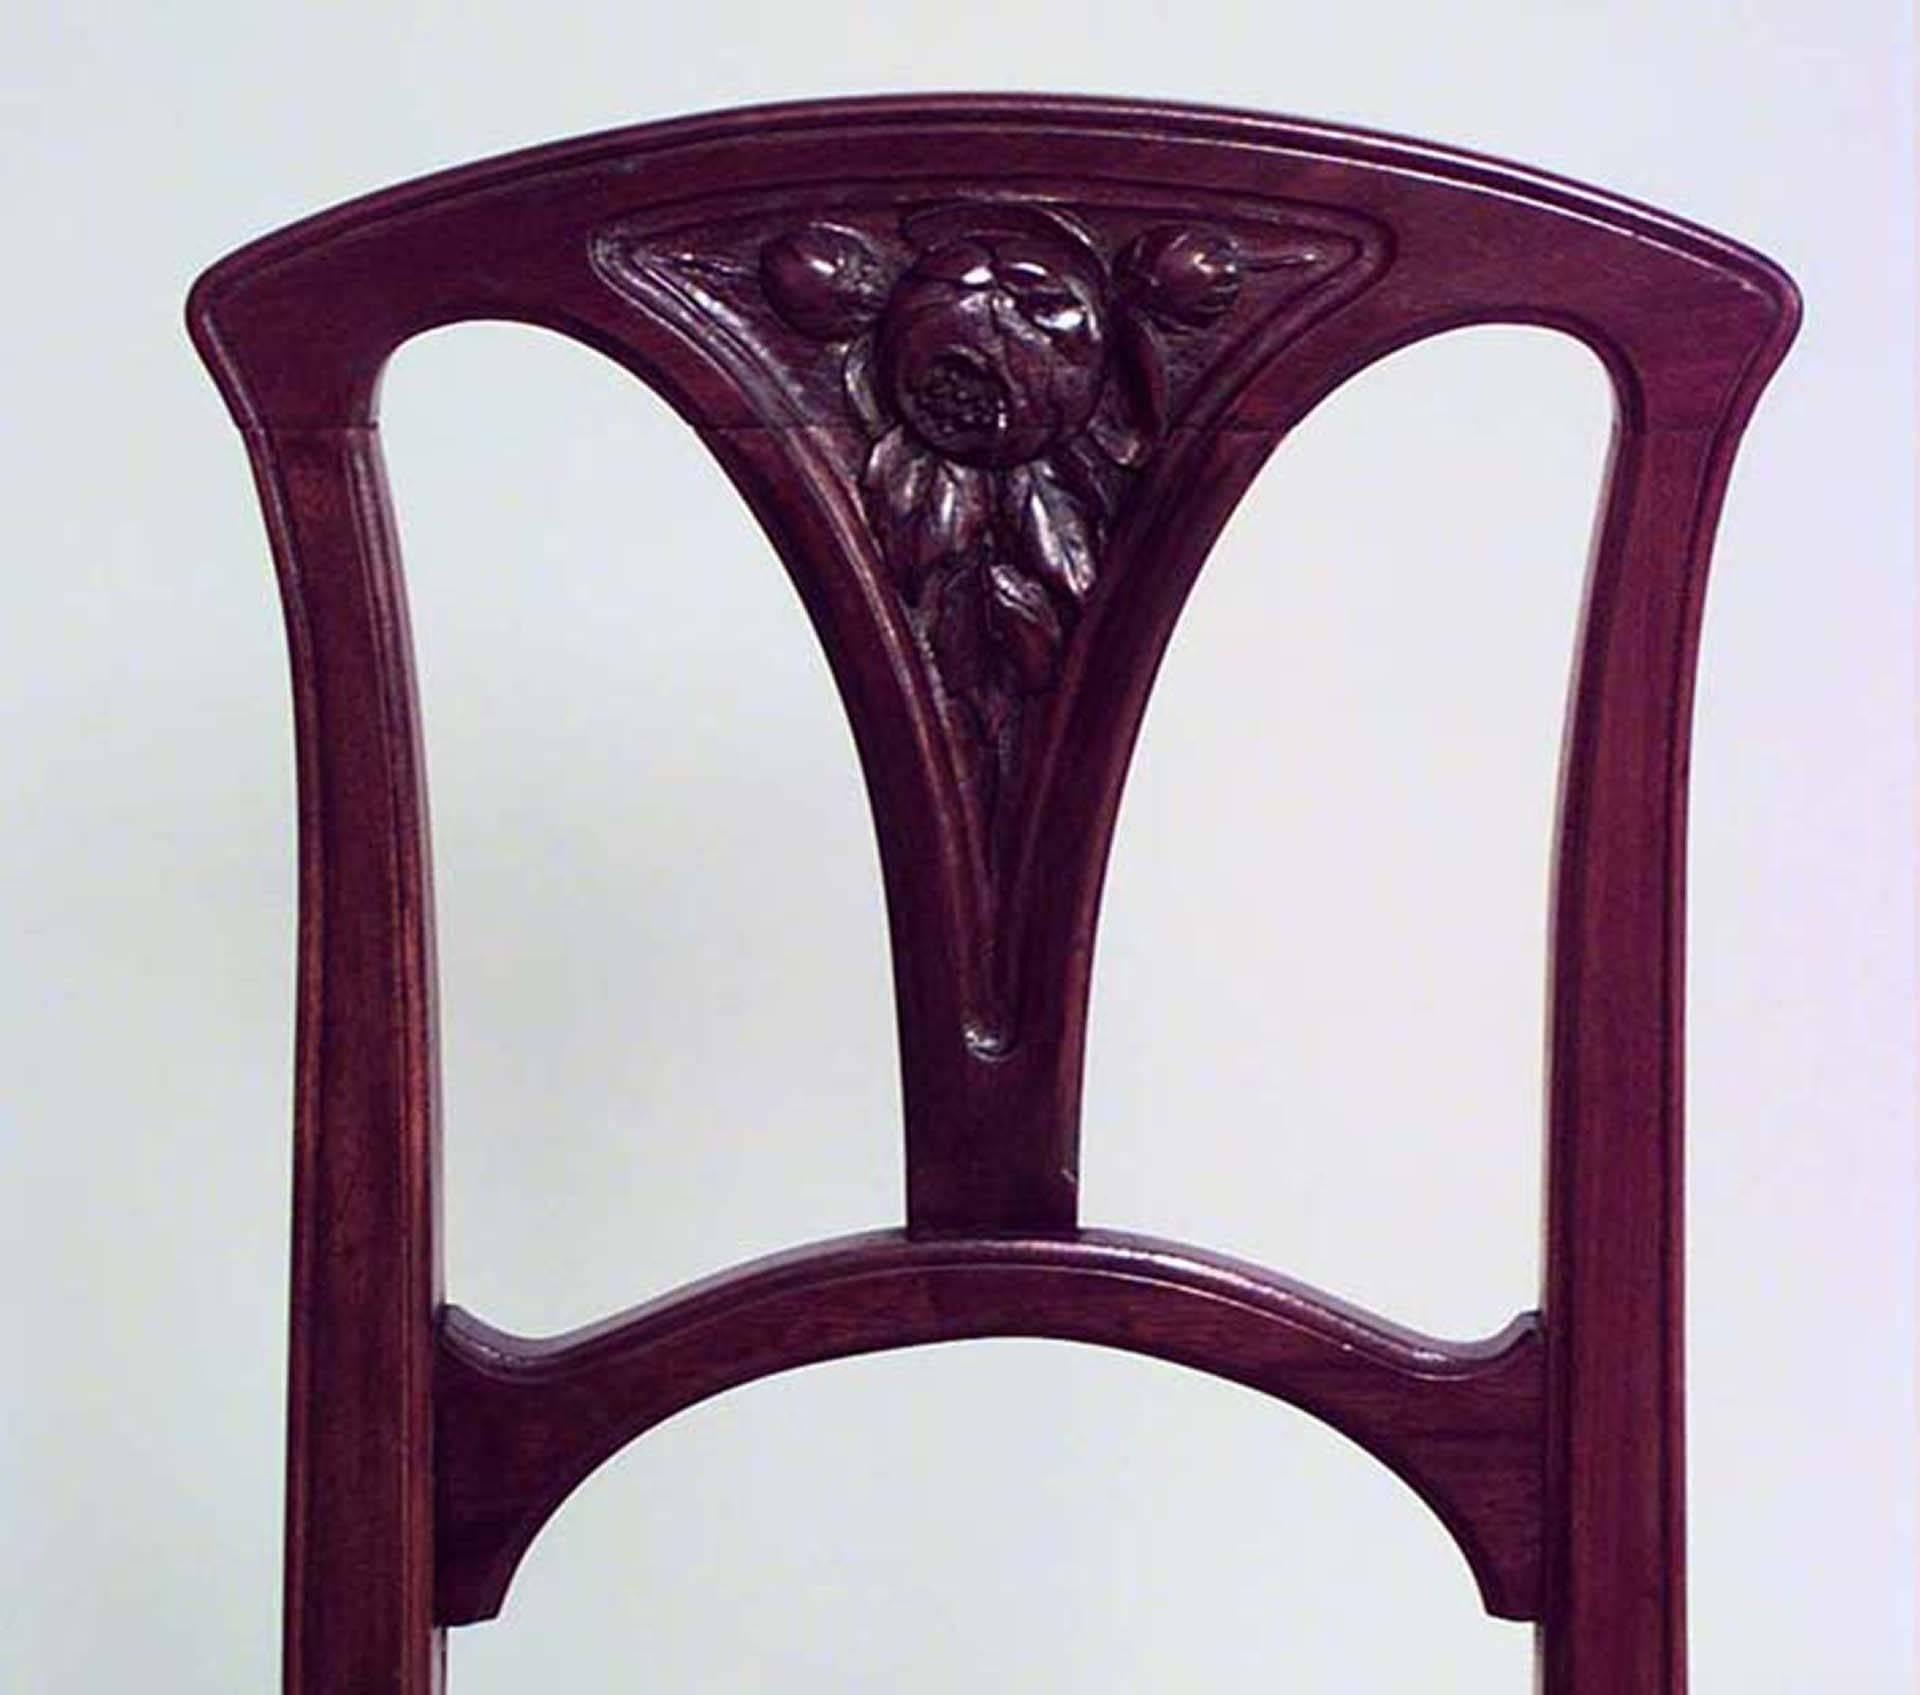 20th Century French Art Nouveau Walnut and Velvet Side Chair For Sale